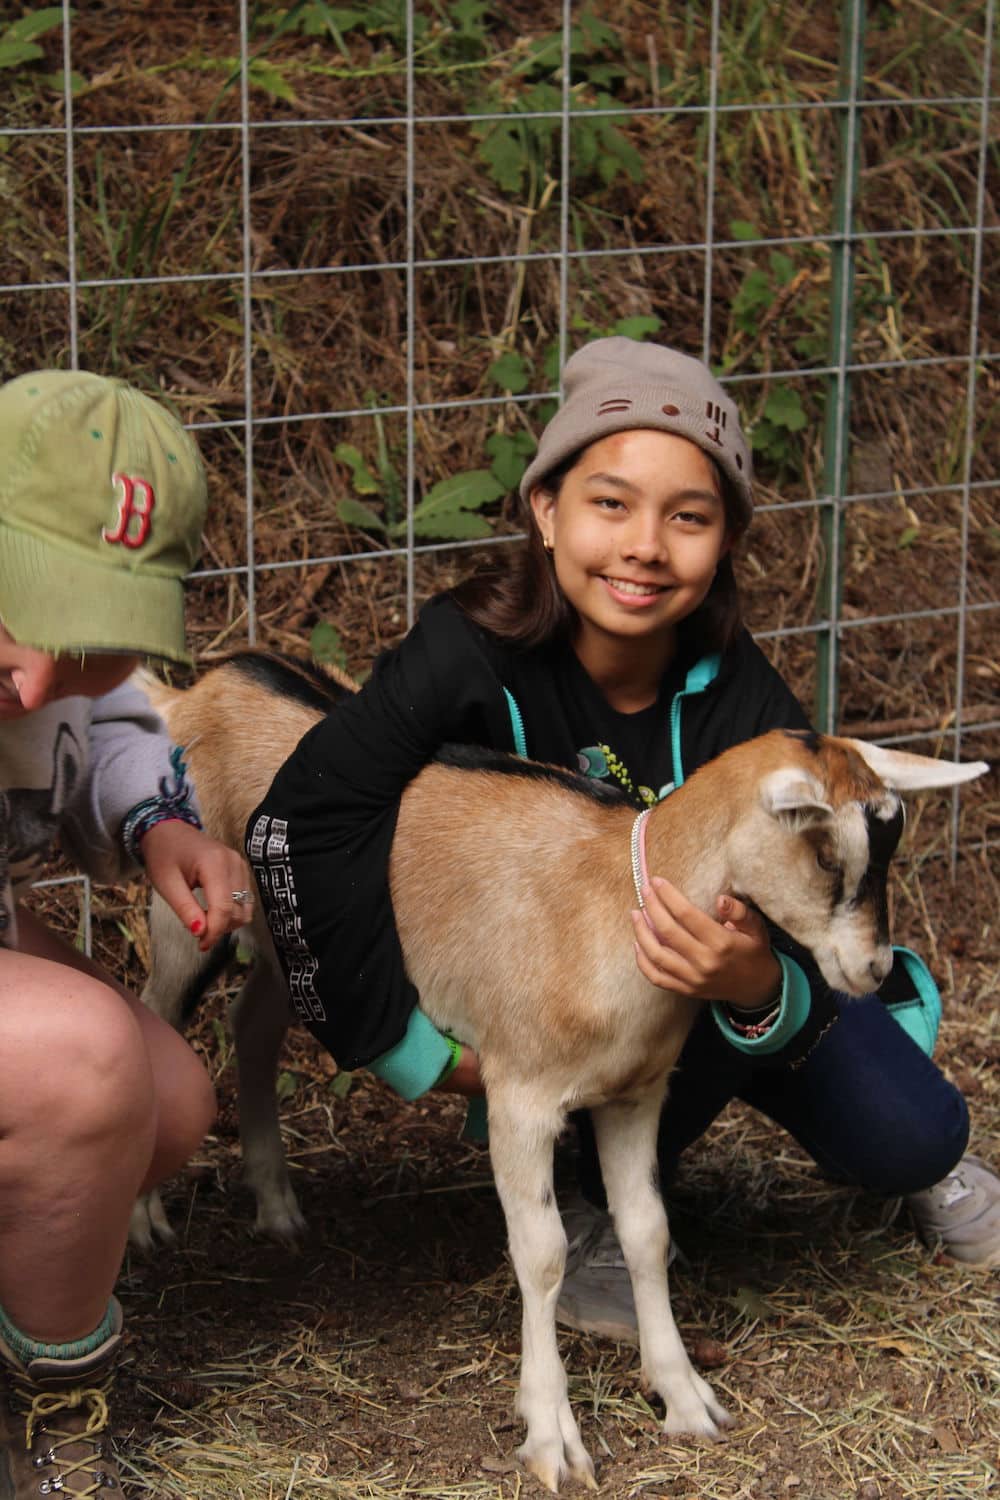 Girls with young goats